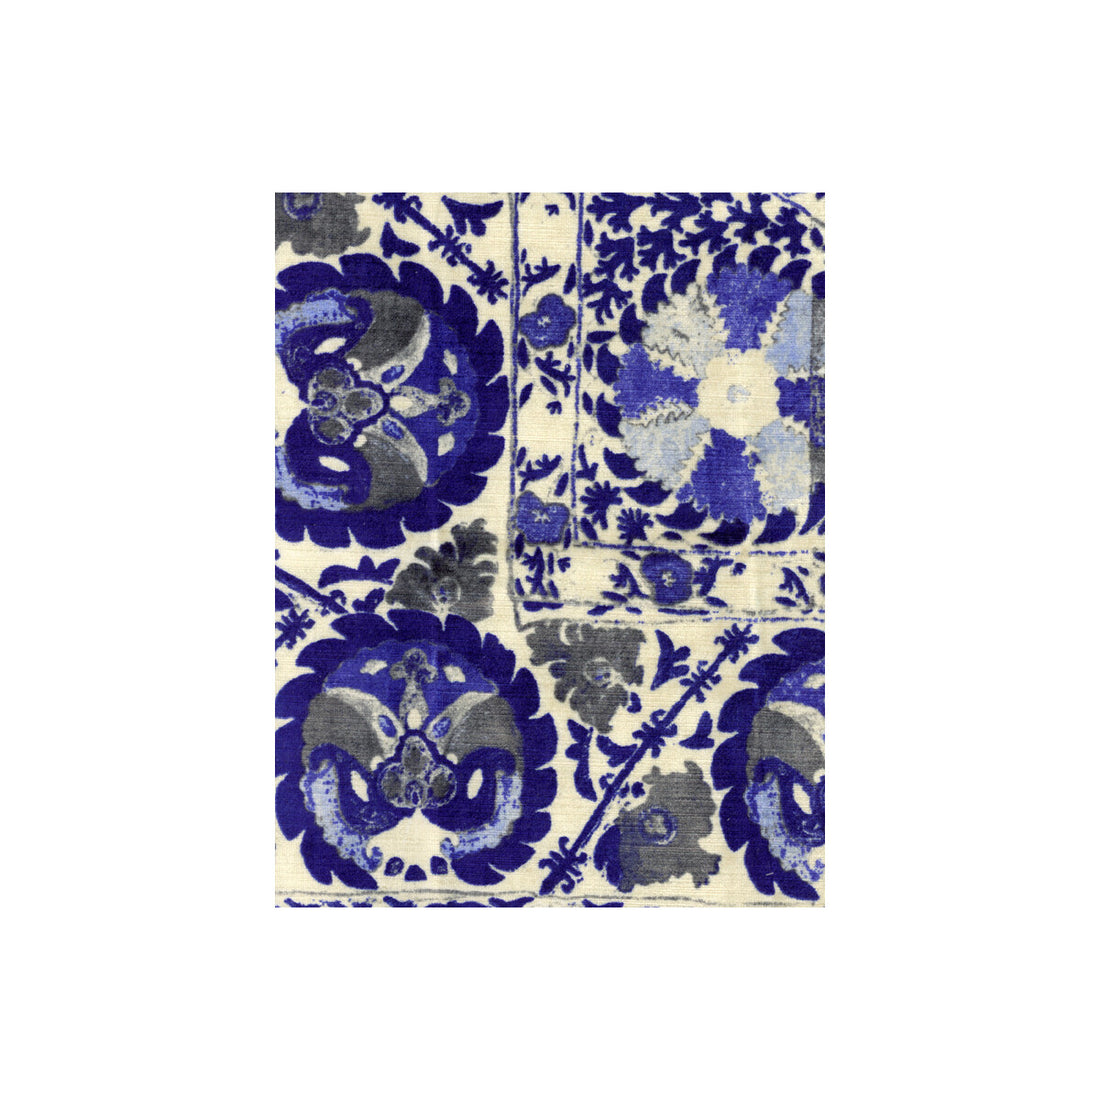 Iznik fabric in cobalt color - pattern AM100050.516.0 - by Kravet Couture in the Andrew Martin Clarendon collection